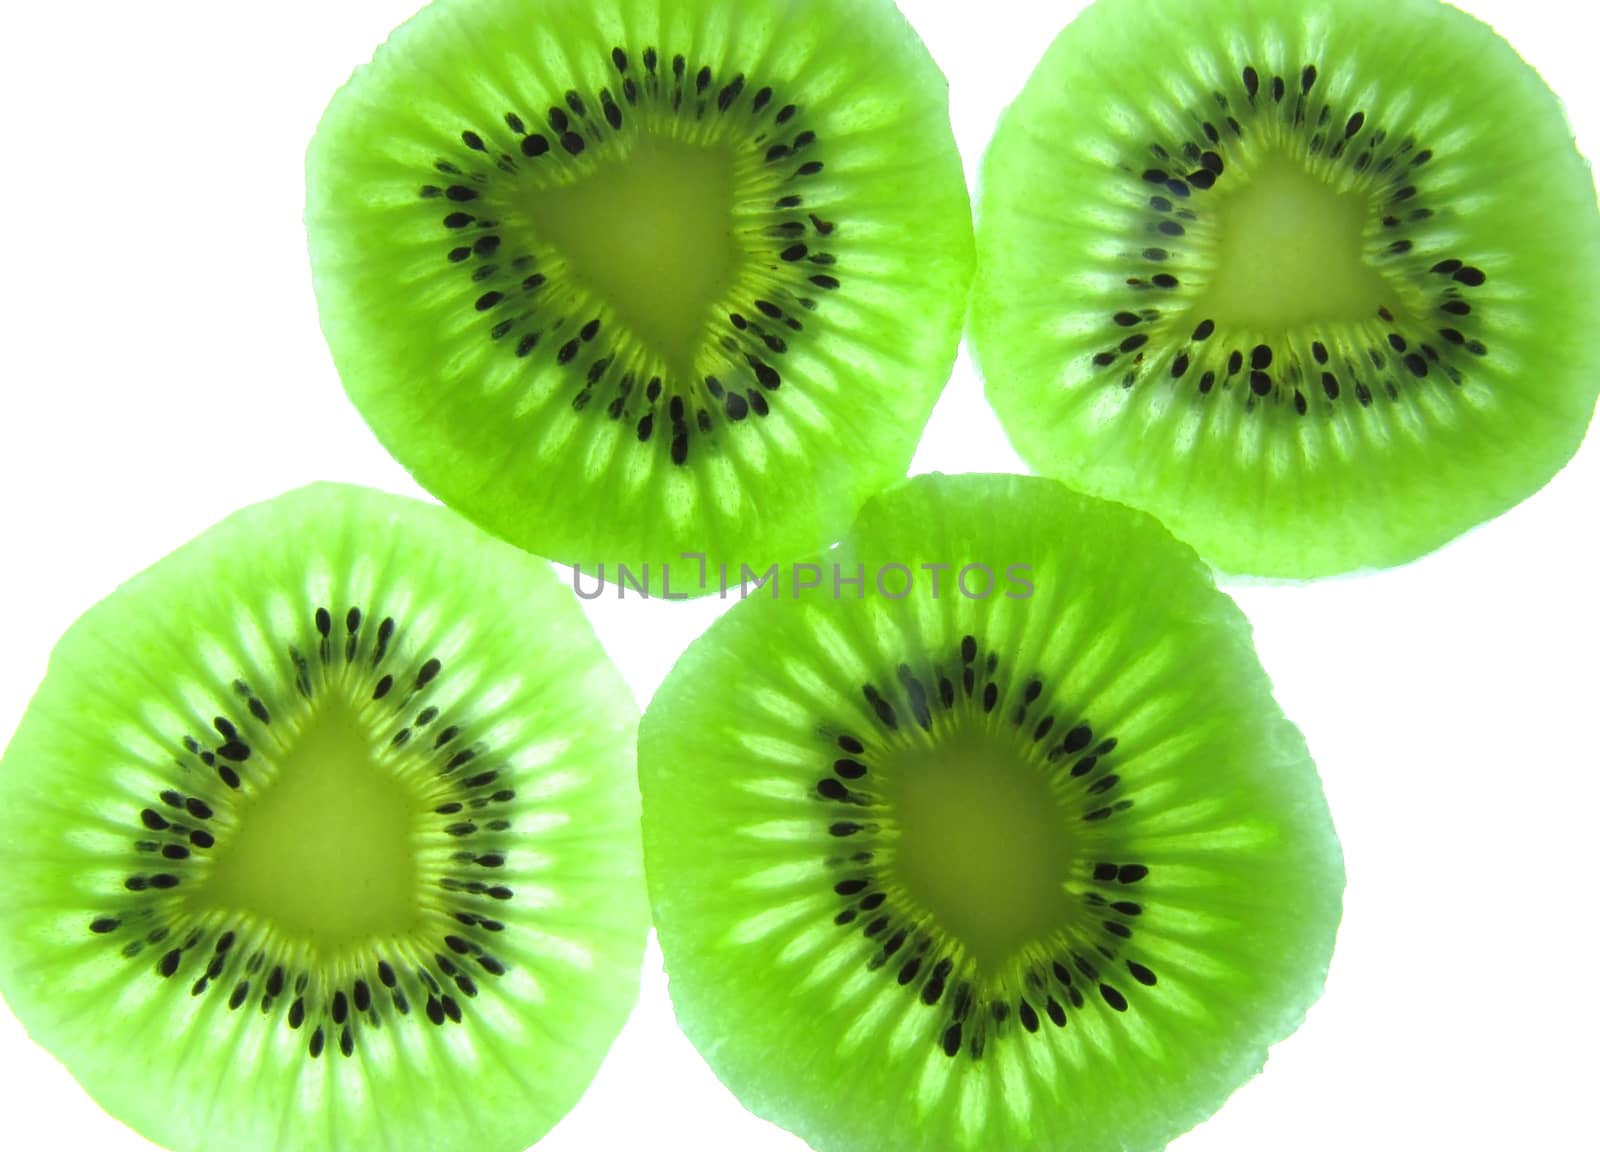 Abstract photo of a green kiwi fruit